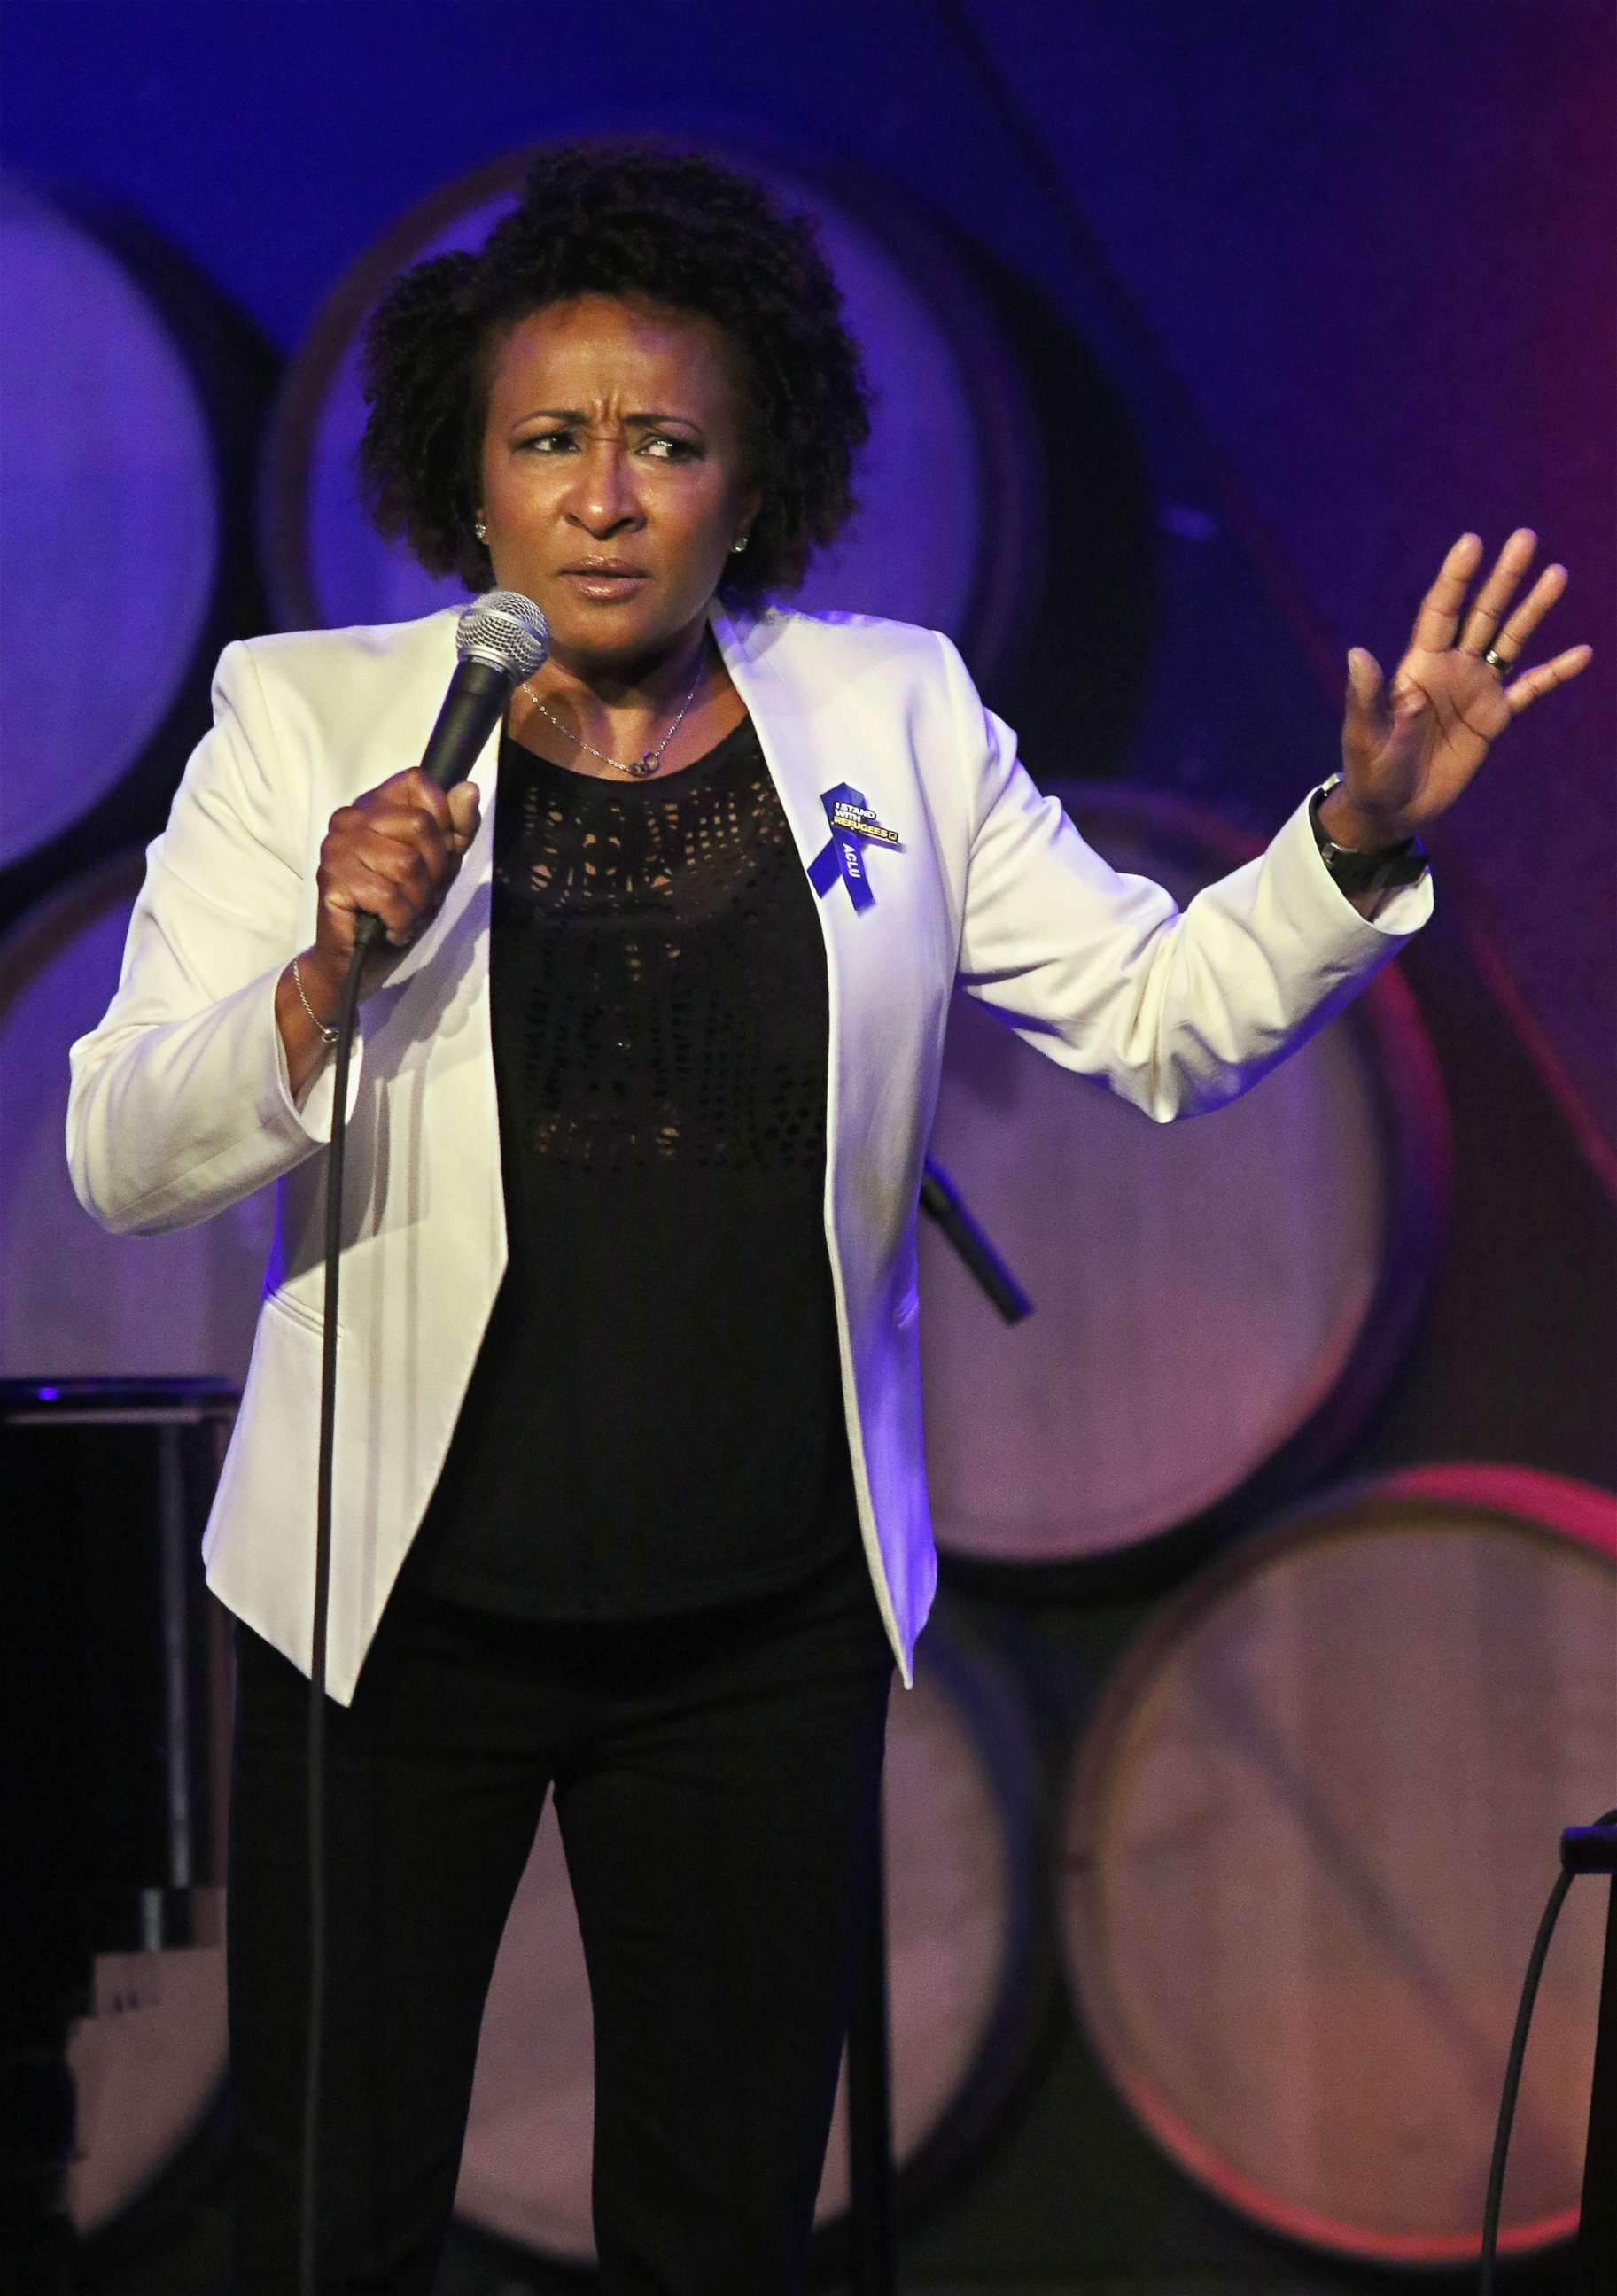 PHOTO: Comedian Wanda Sykes performs at City Winery on April 26, 2017 in New York.